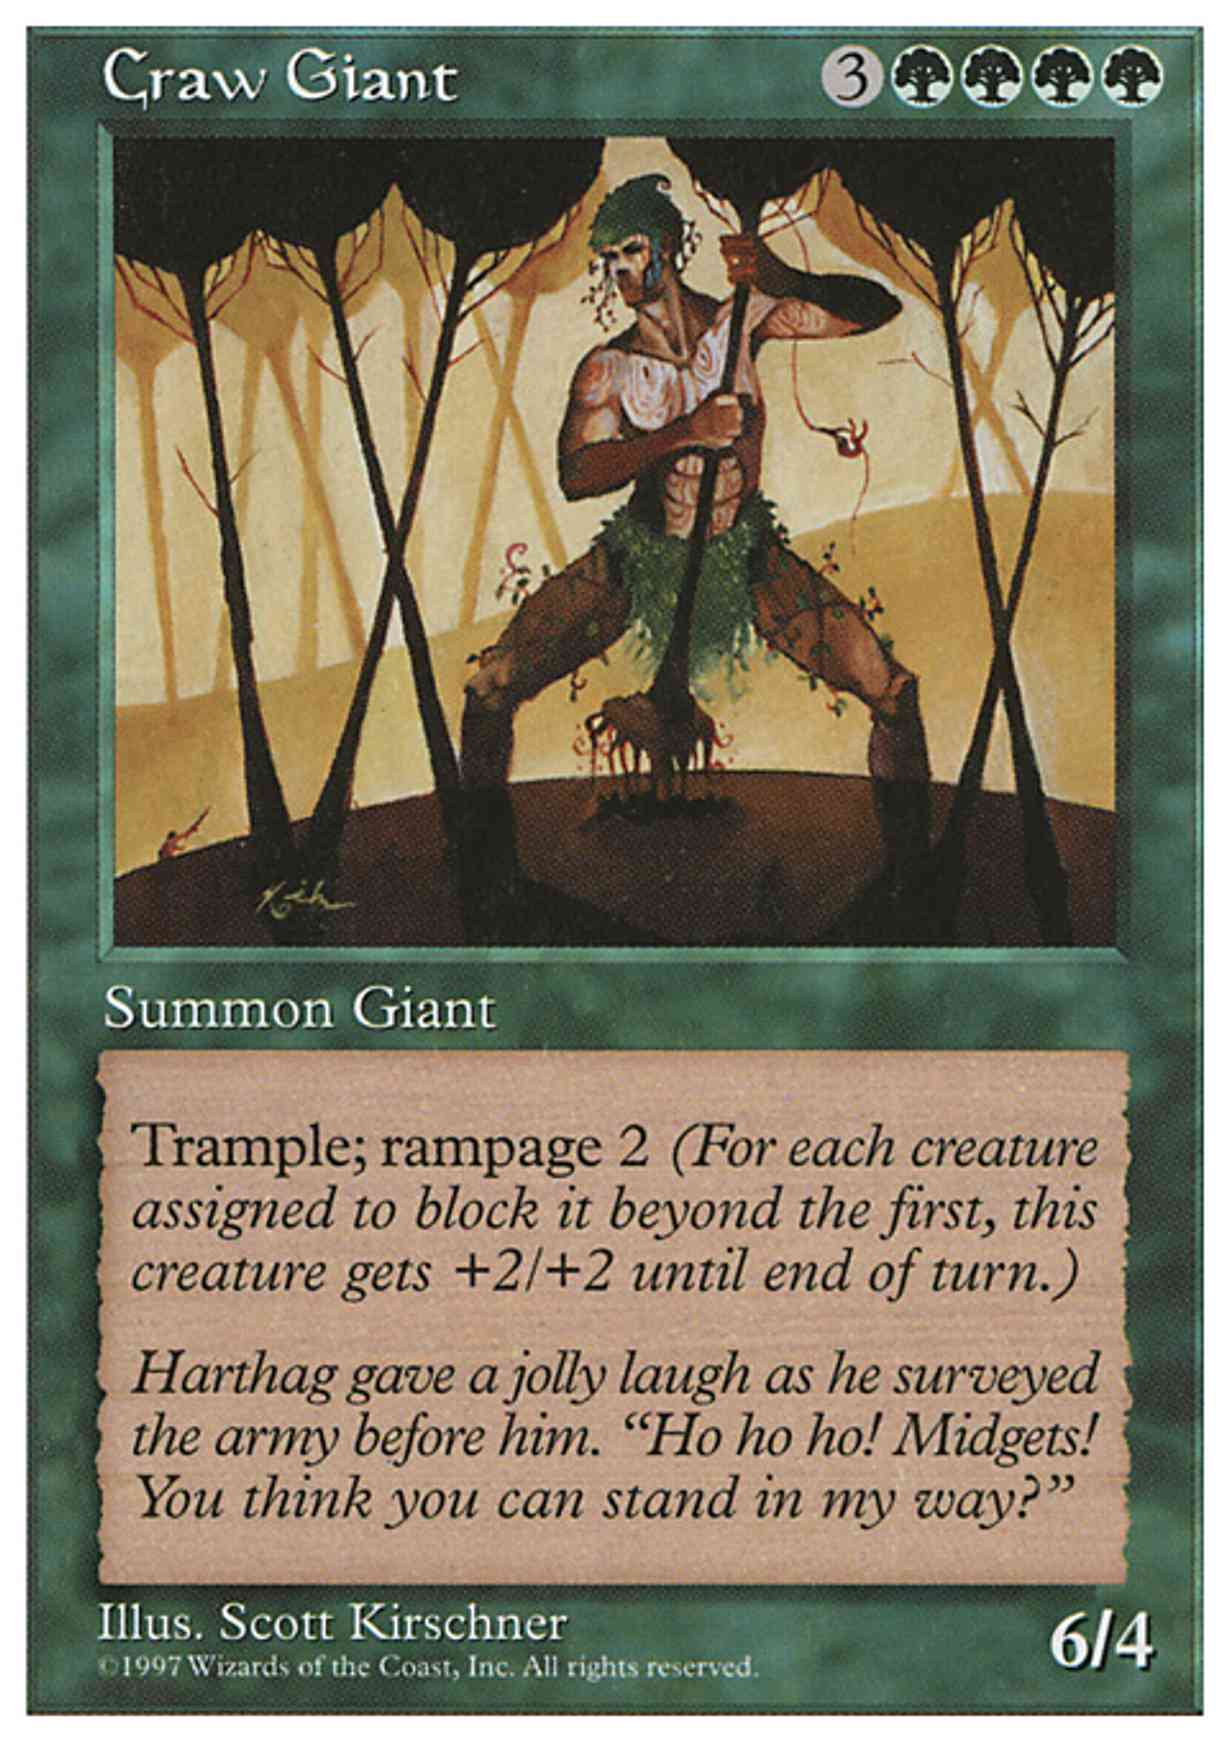 Craw Giant magic card front